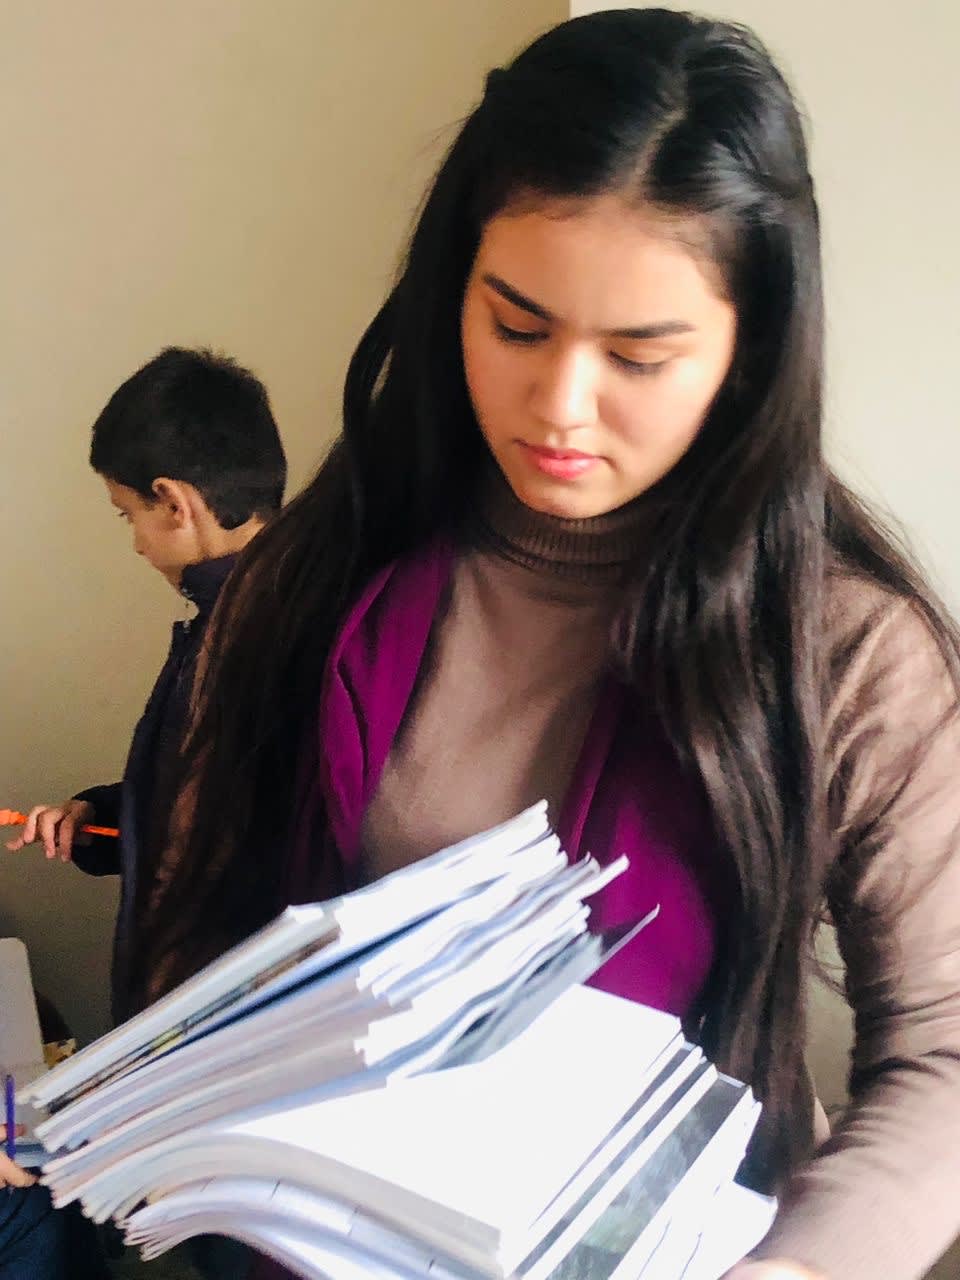 A girl stands holding a stack of papers